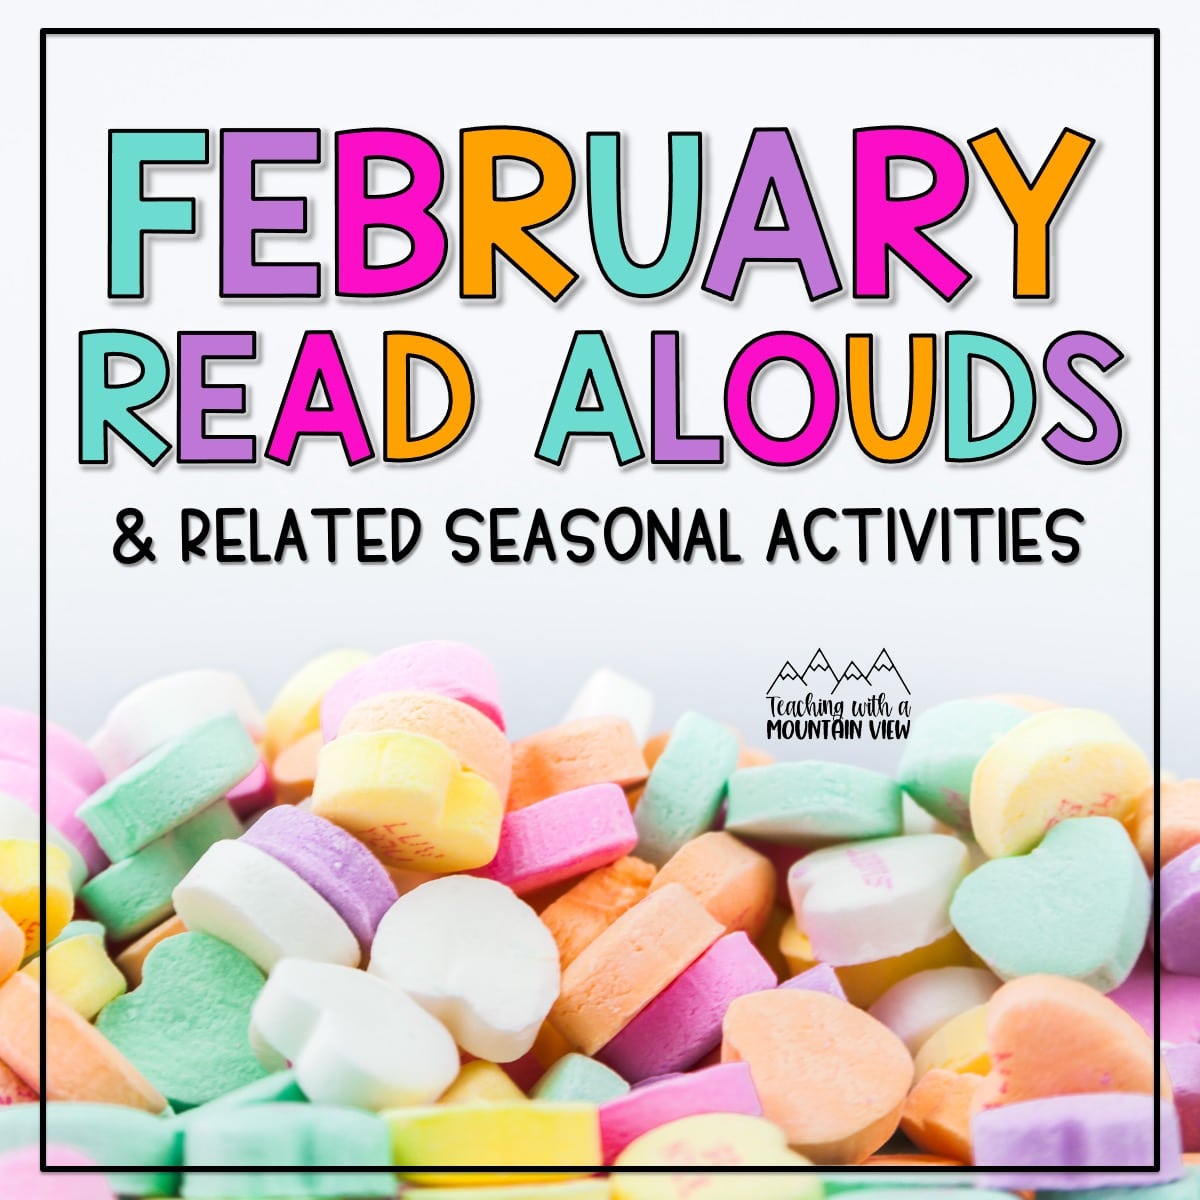 February read alouds and related activities to use during morning meeting and your upper elementary literacy block.